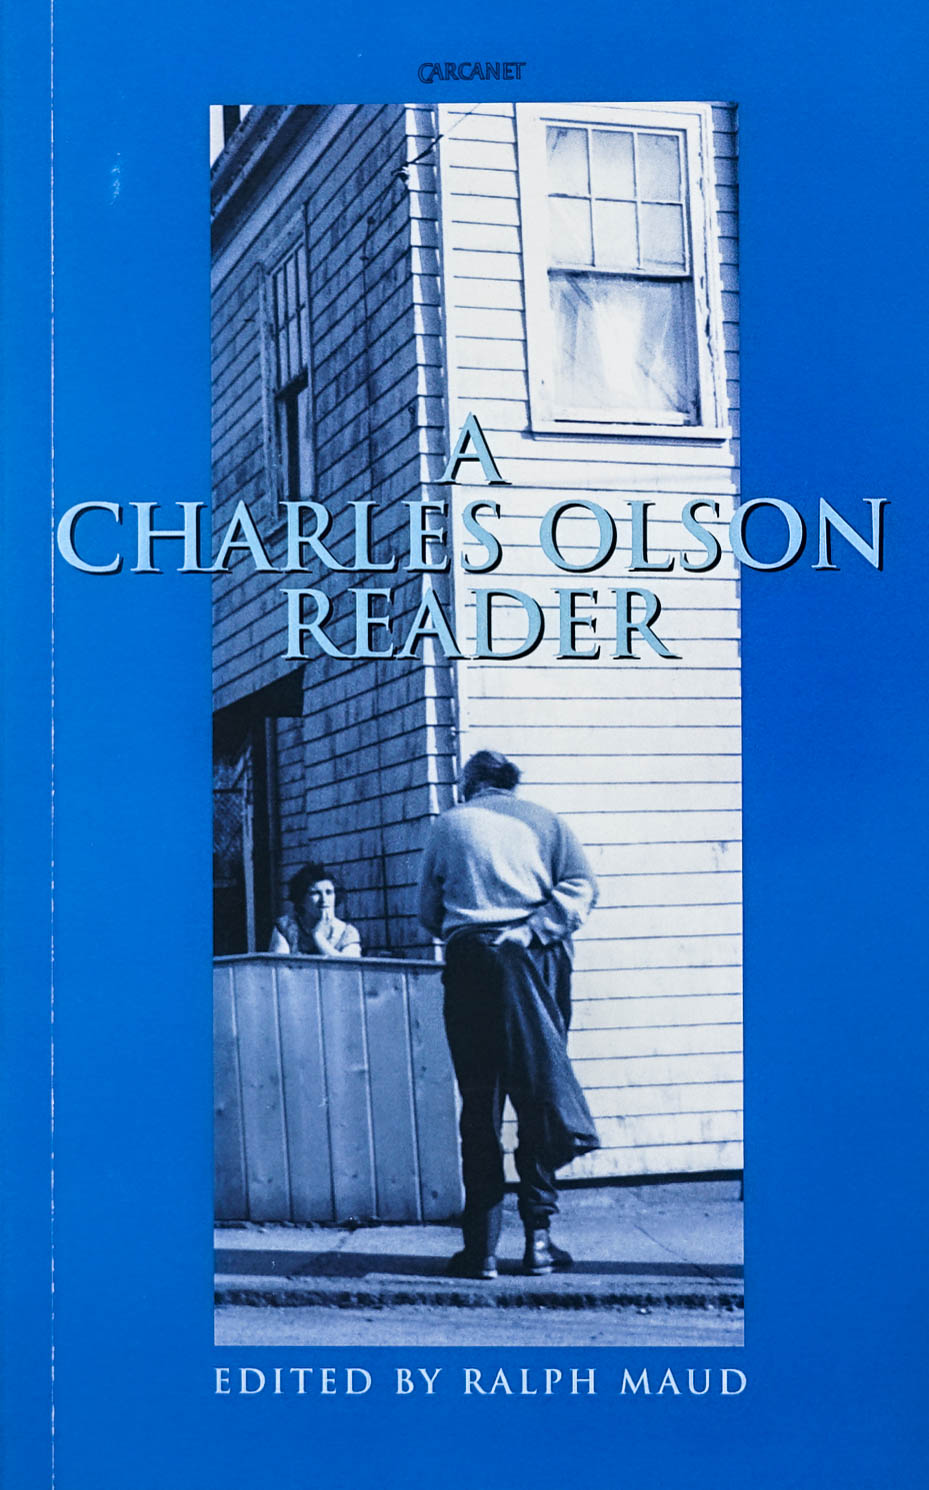 A Charles Olson Reader Editied by Ralph Maud in light blue serif type with an image of a man speaking to a women behind a fence and house and blue backdrop